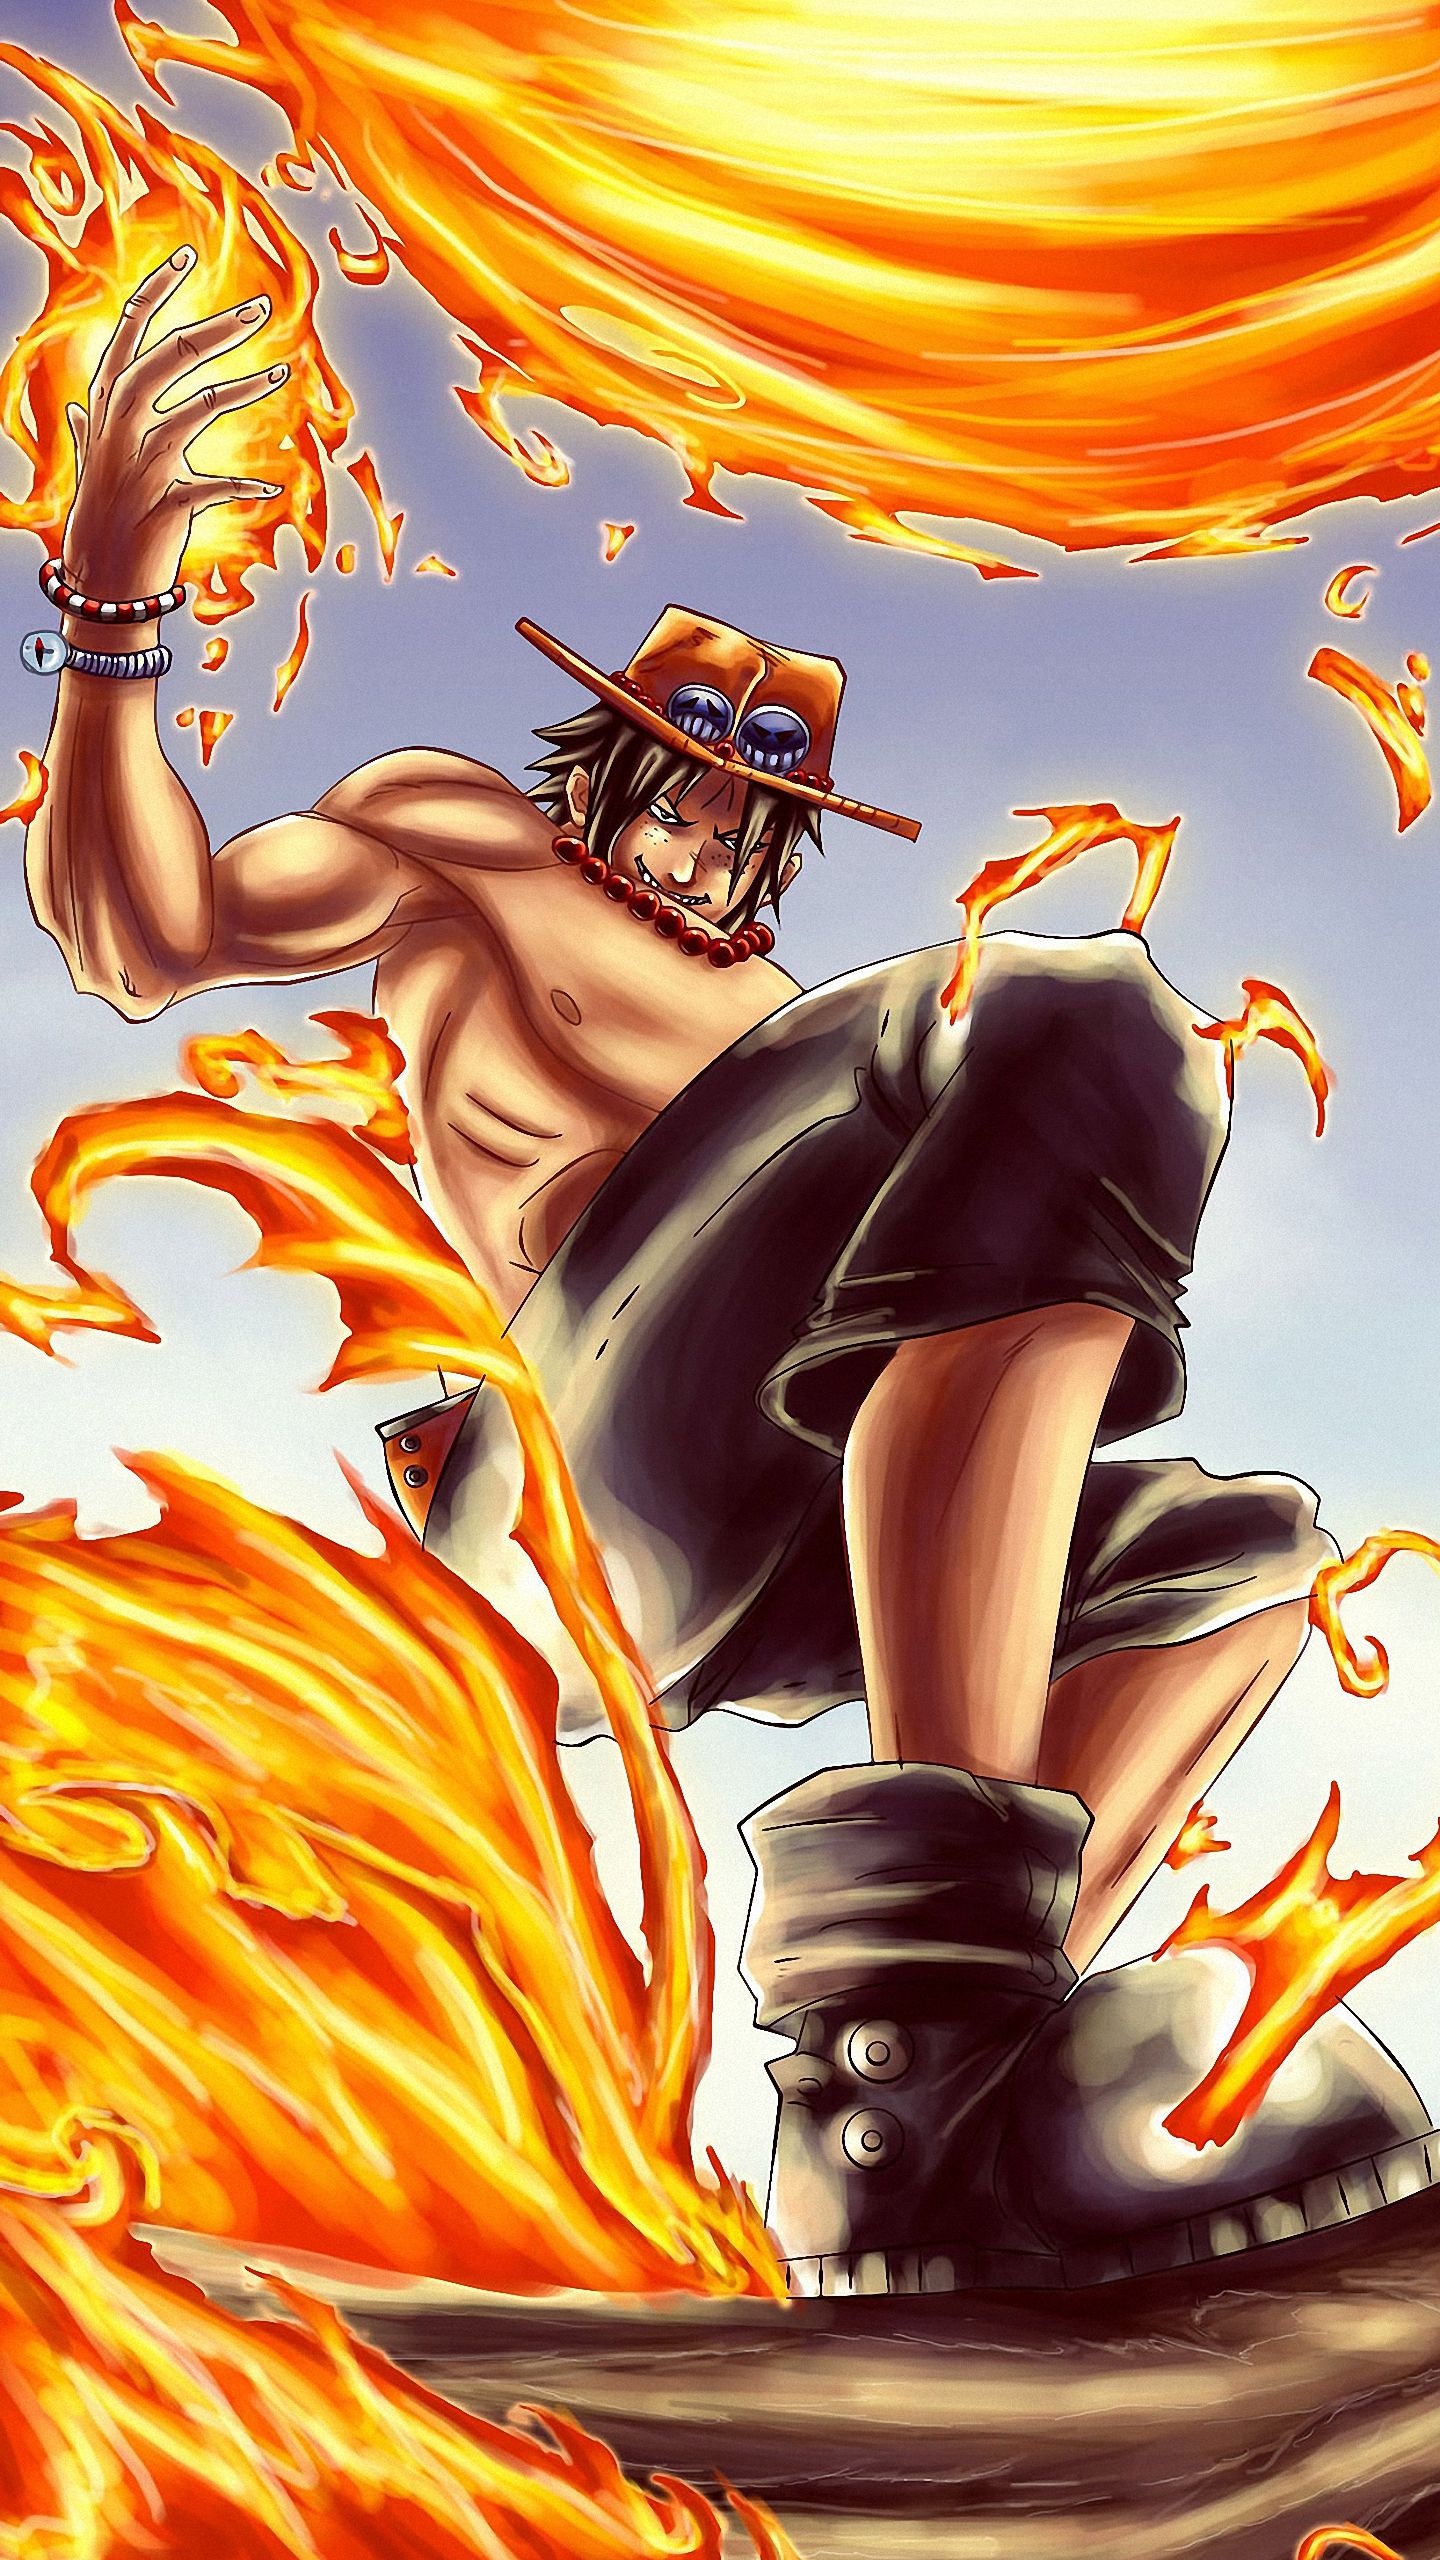 1440x2560 Portgas D Ace - One Piece iPhone 6s Обои HD One piece wal...